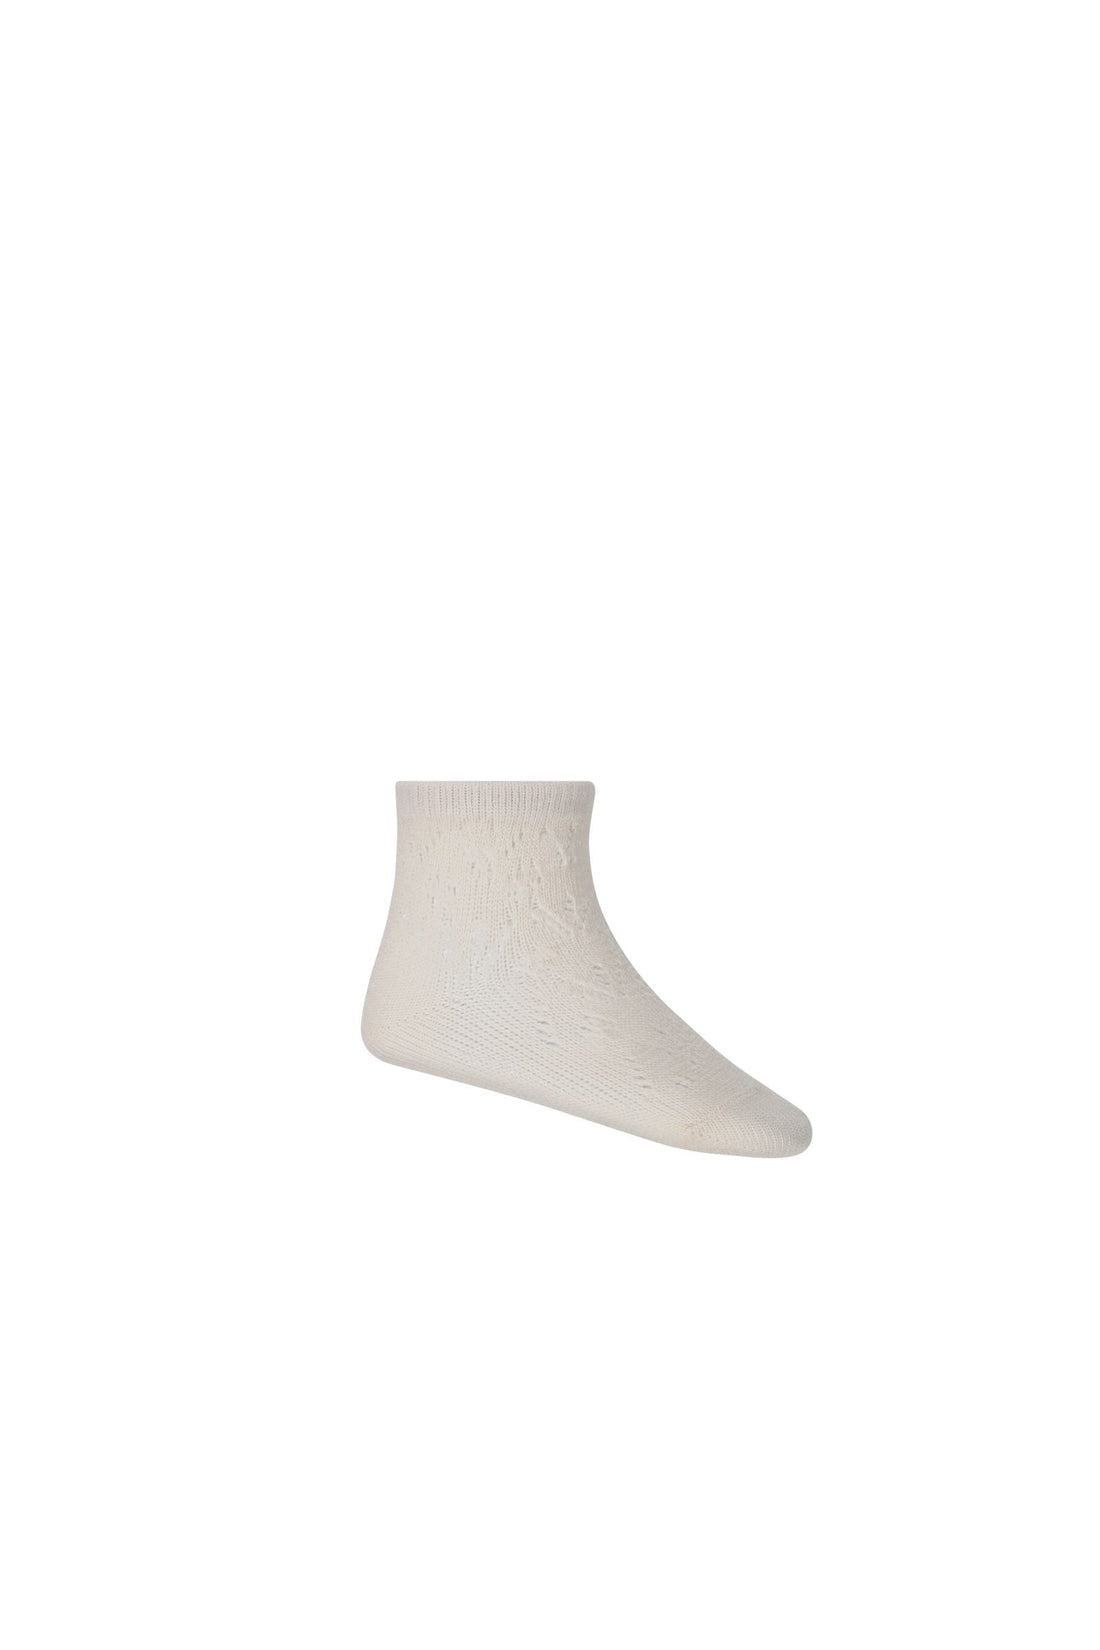 Scallop Weave Frill Ankle Sock - Rosewater